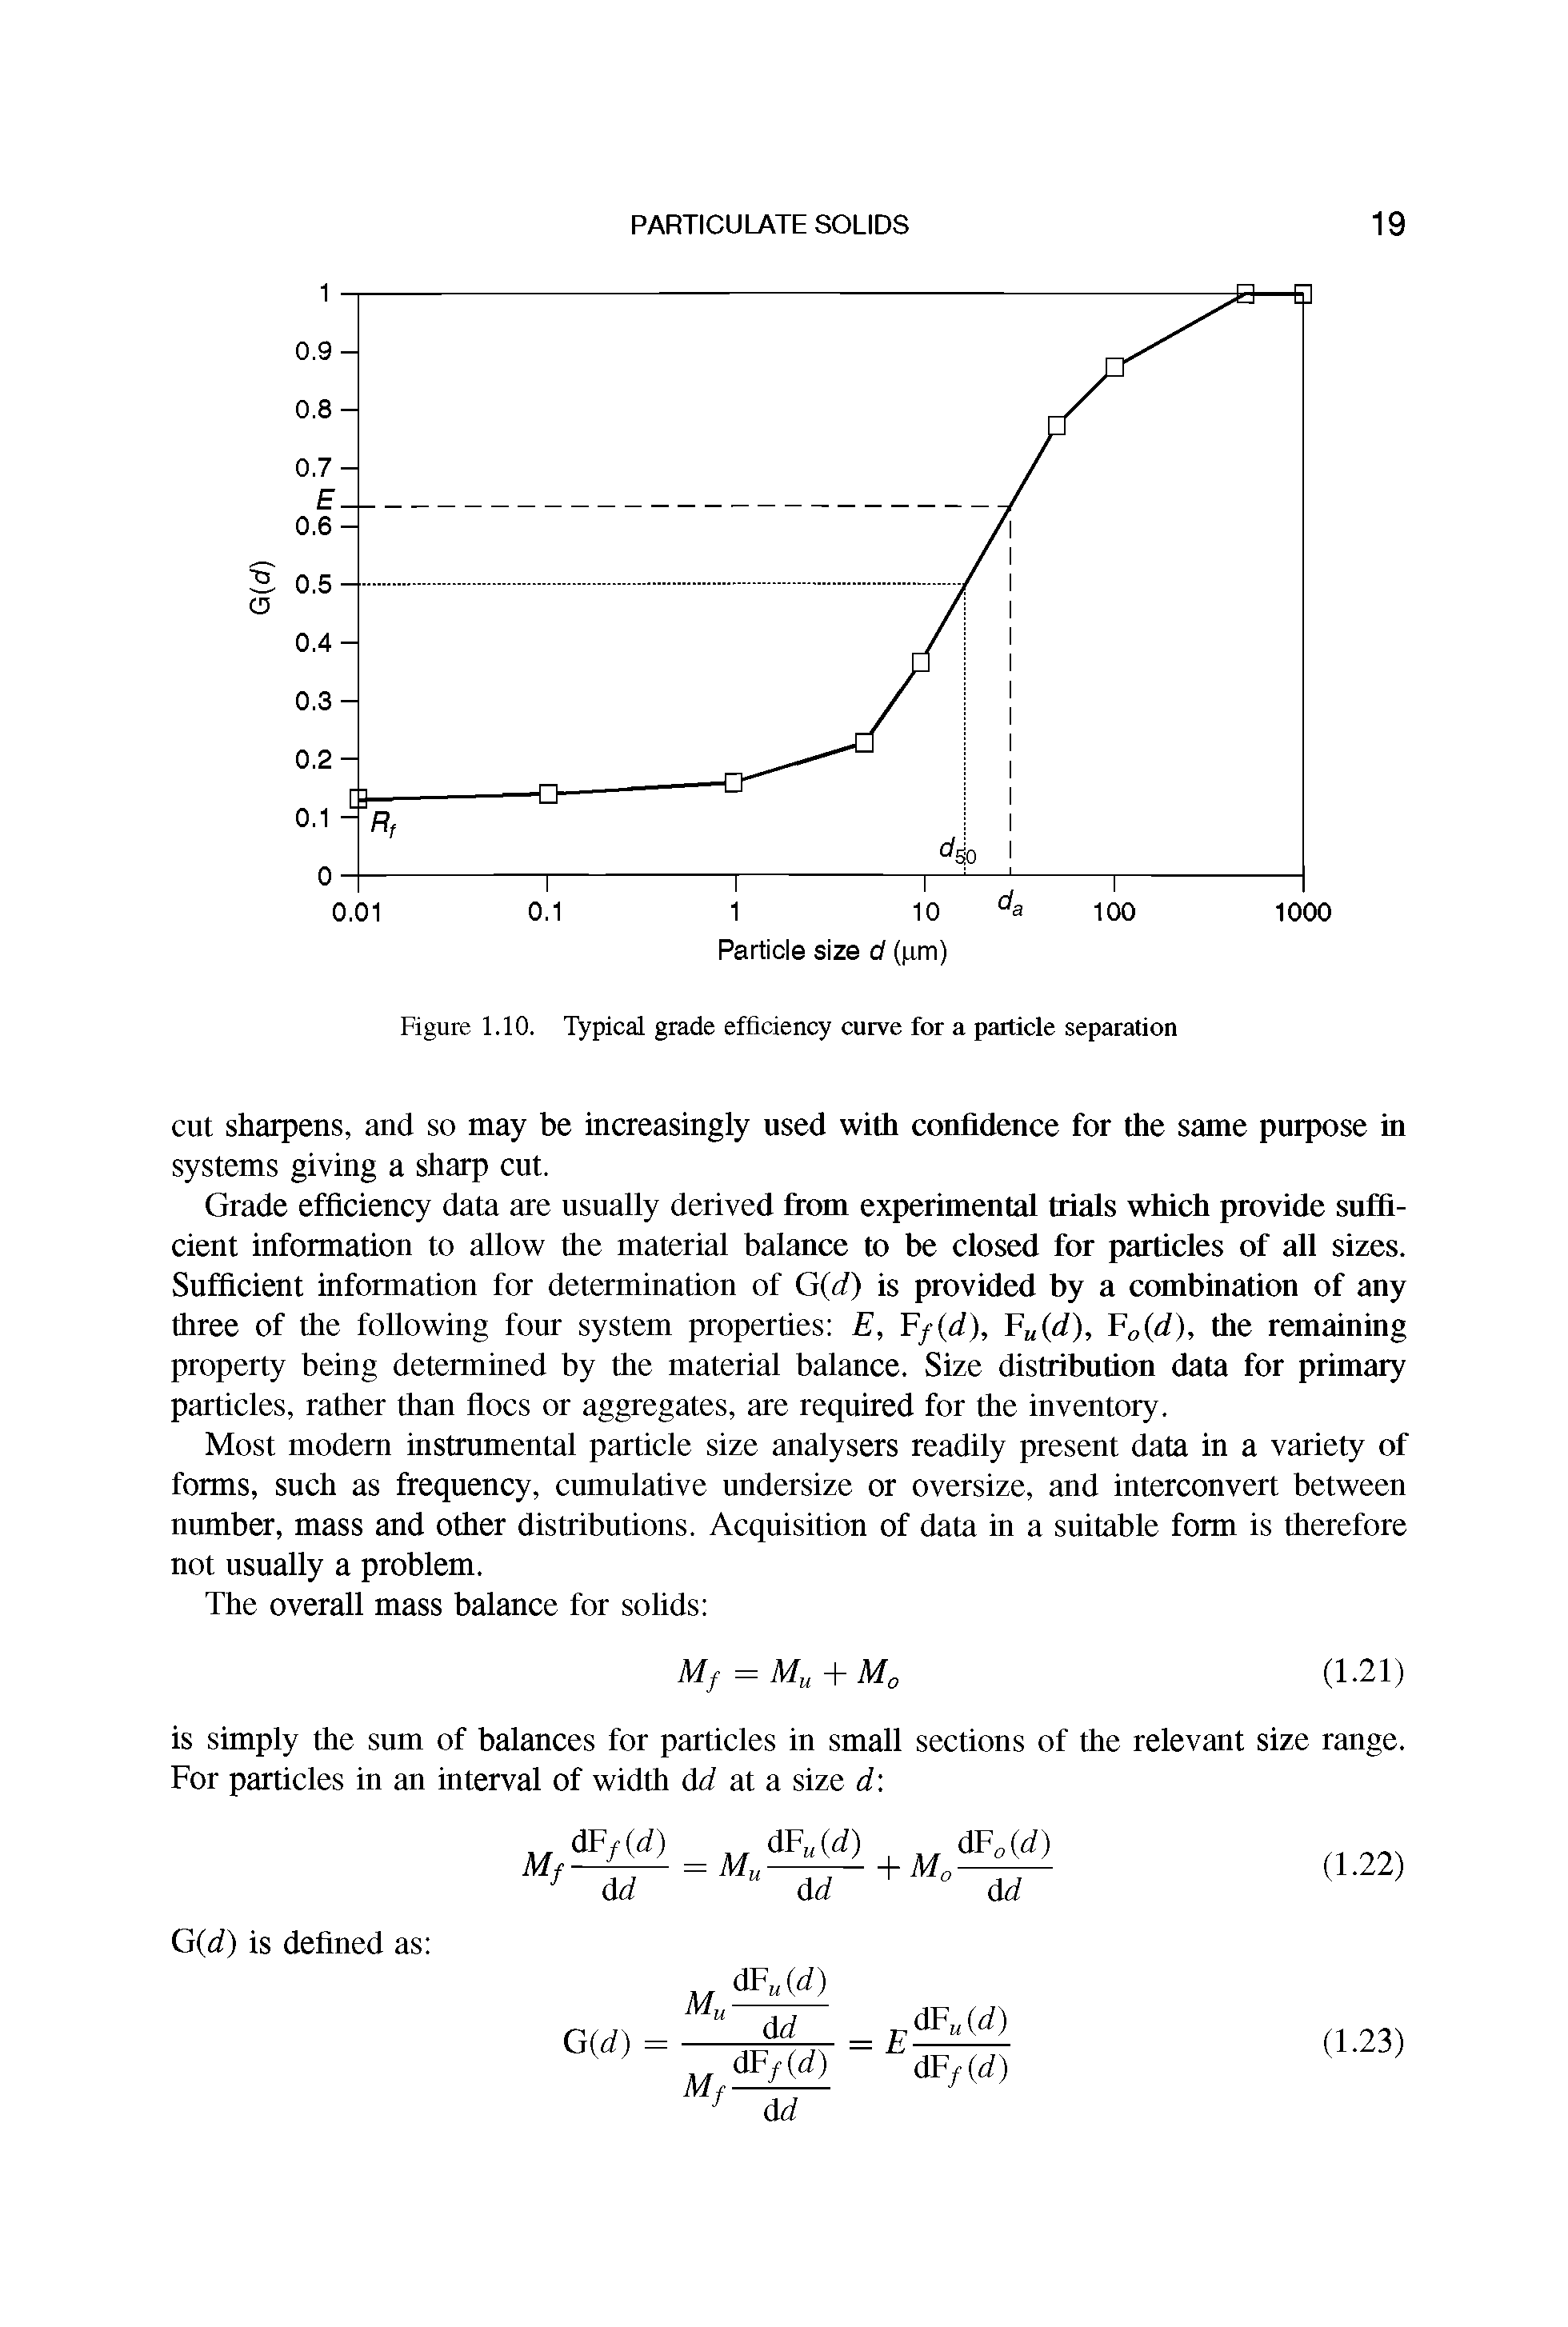 Figure 1.10. Typical grade efficiency curve for a particle separation...